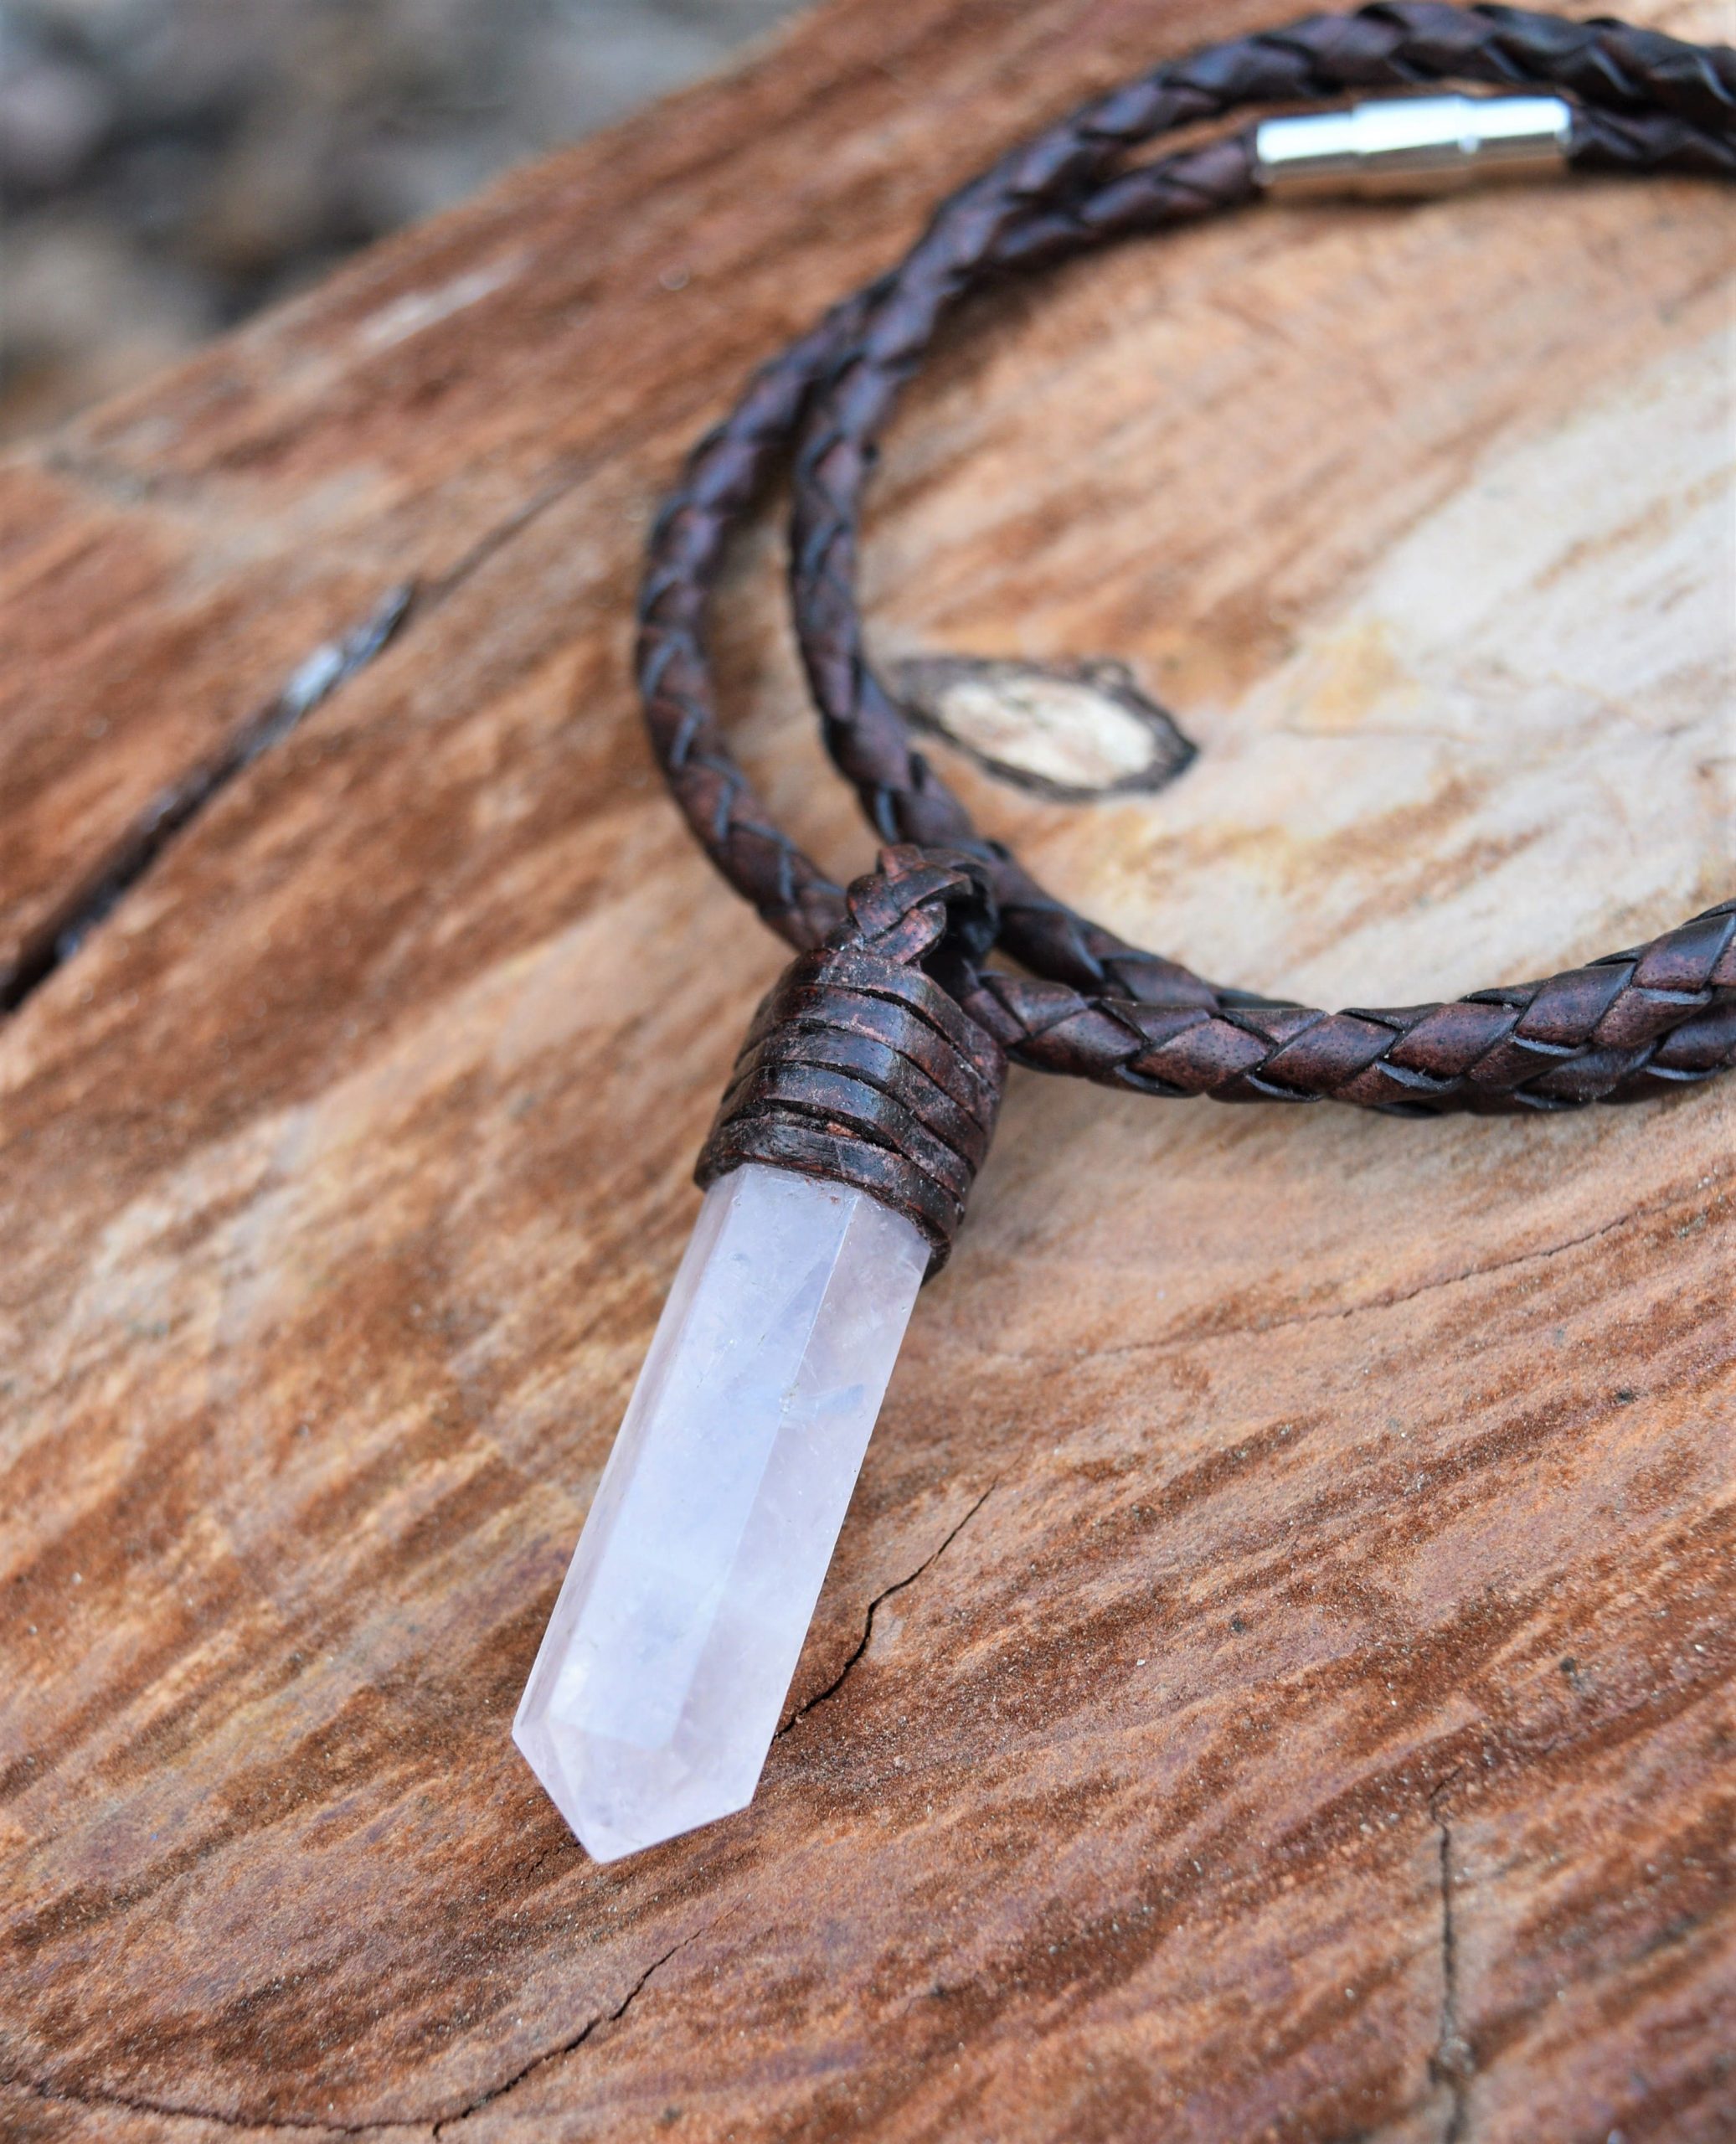 Pointed rose quartz stone with leather lace